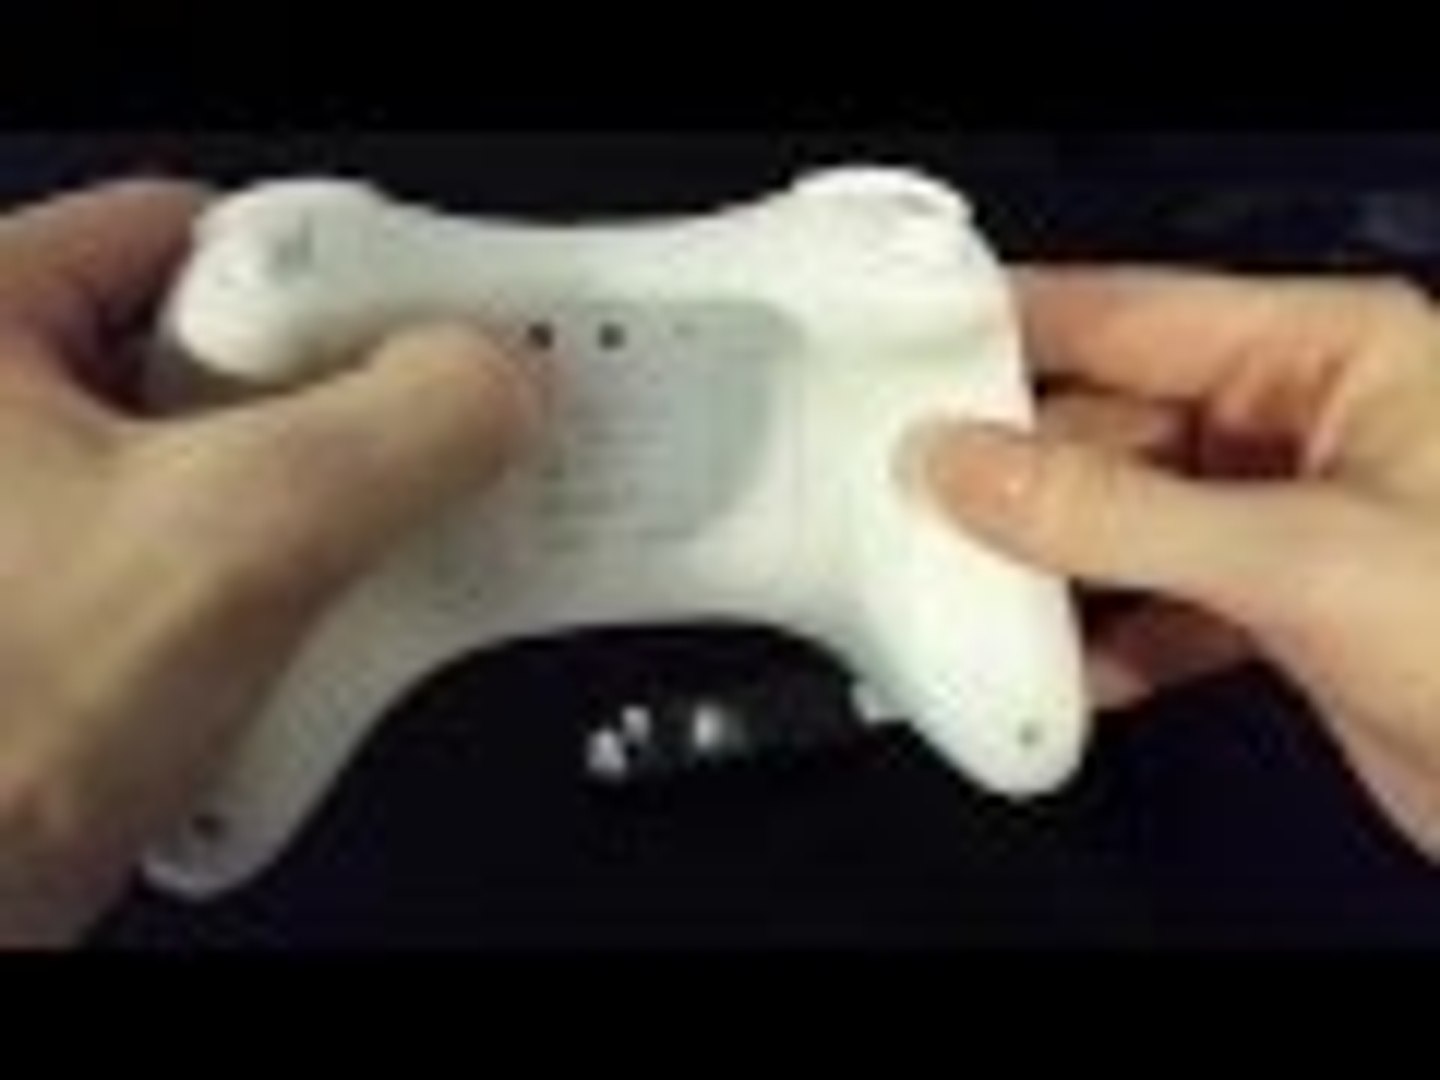 CronusMAX PLUS - How to Use Wii u Pro Controller PS4 - video Dailymotion